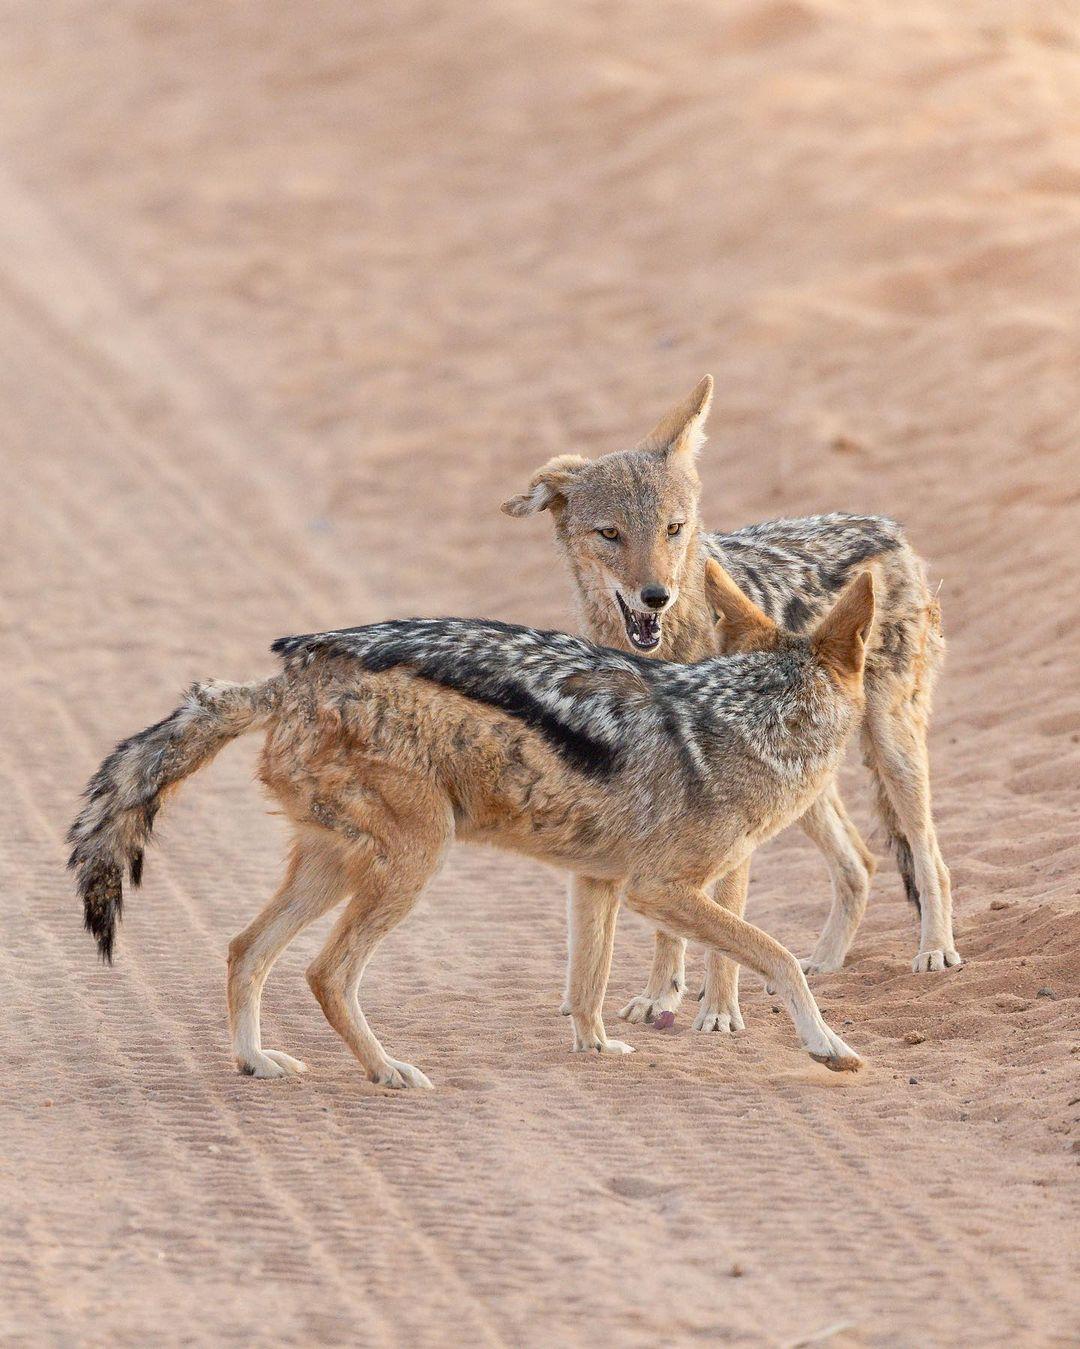 class="content__text"
 Playful black-backed jackals 😊

The black-backed jackal typically lives in pairs or in small family groups consisting of a mated pair and their offspring. Each family group tends to have a strict dominance hierarchy, with the breeding pair at the top. 

Mated pairs from strong bonds stay together for life. 
 